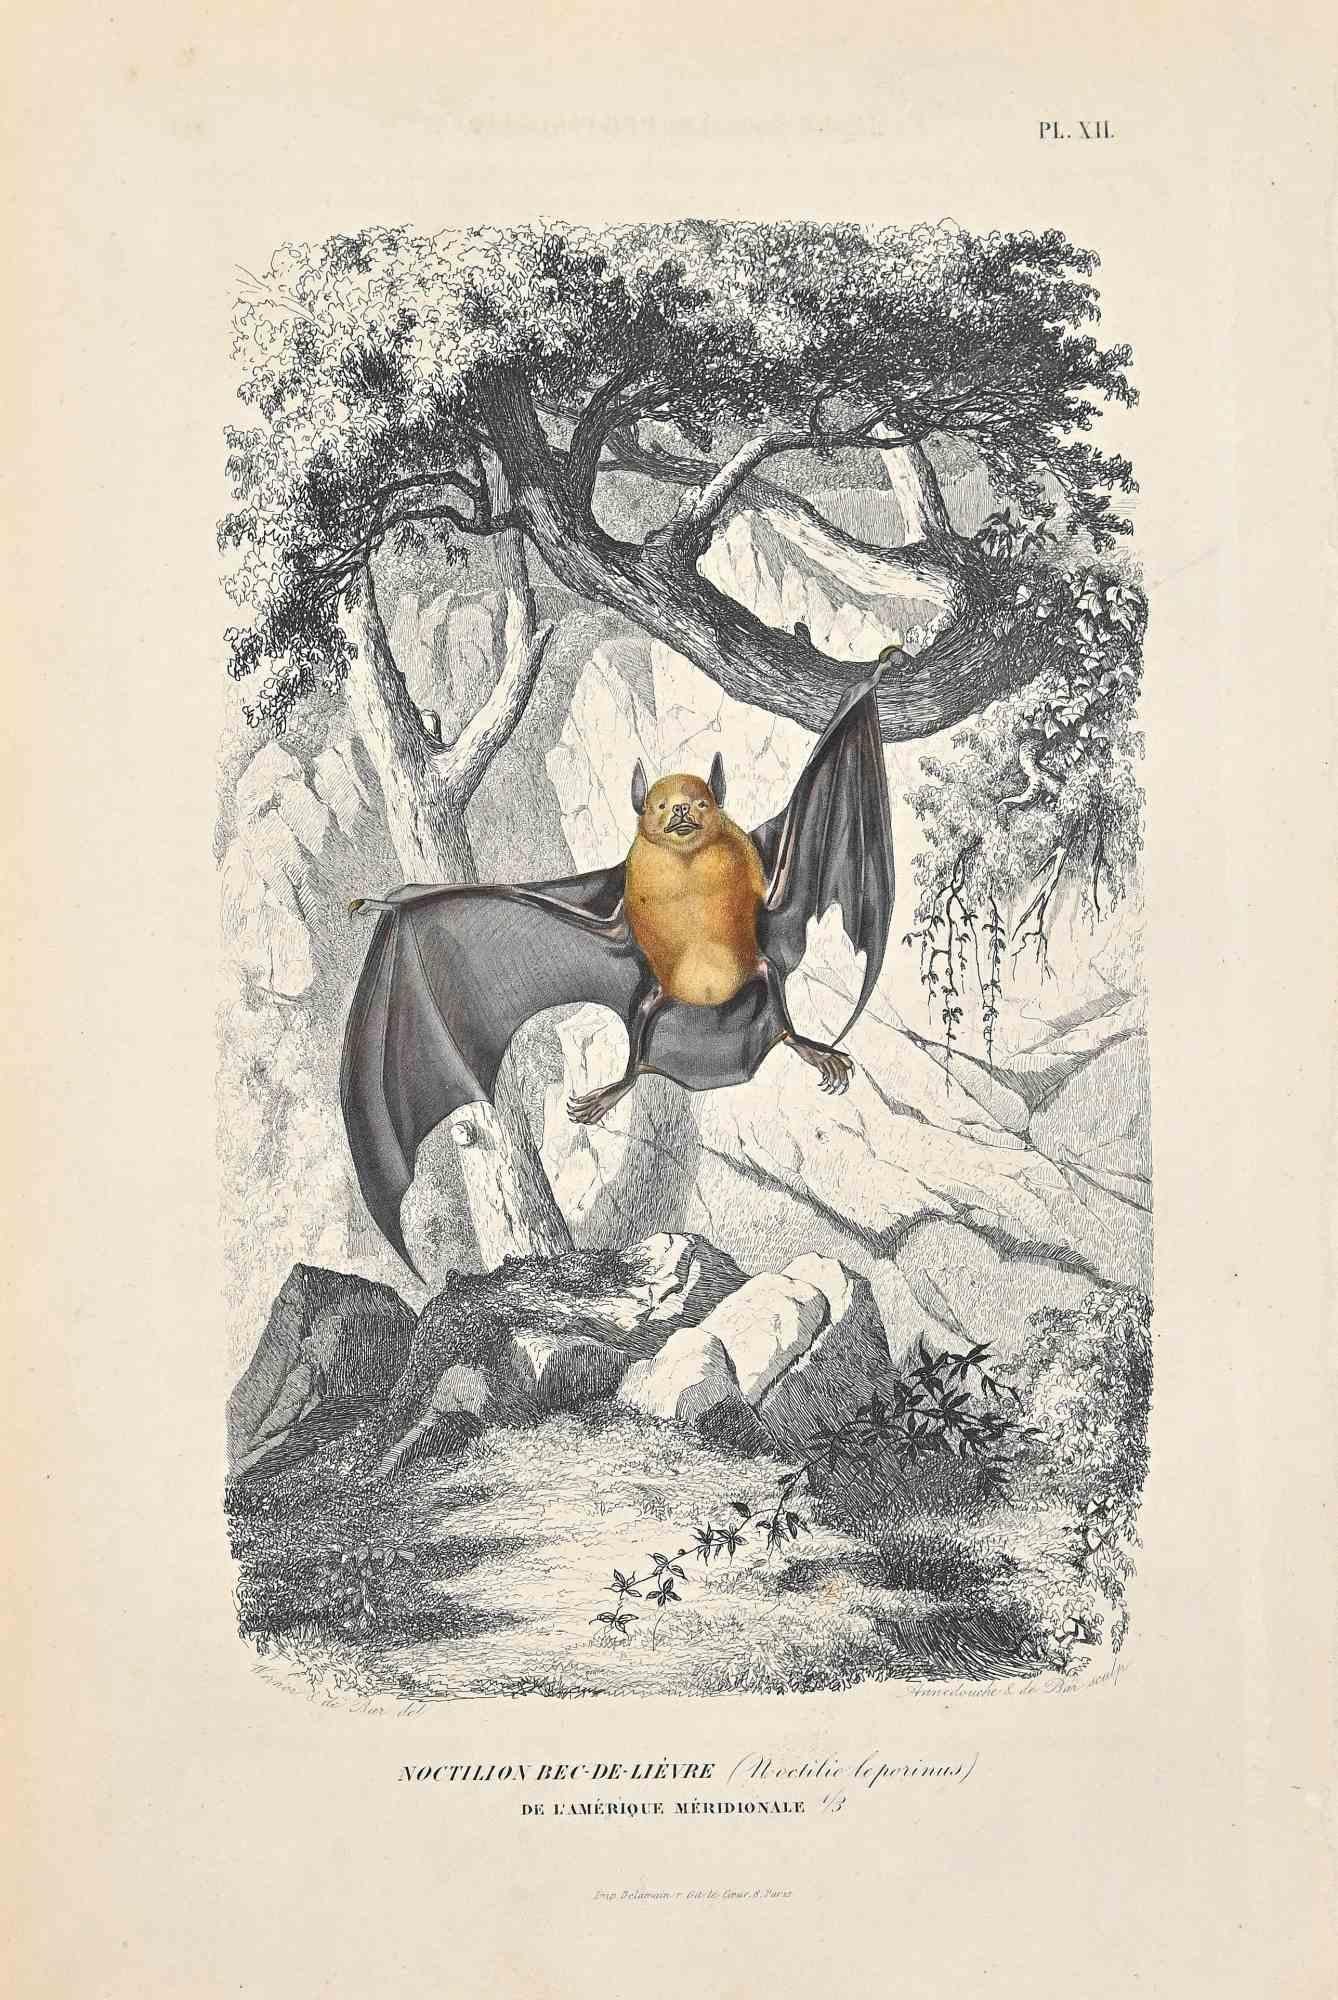 Noctule Bat is an original lithograph on ivory-colored paper, realized by Paul Gervais (1816-1879). The artwork is from The Series of "Les Trois Règnes de la Nature", and was published in 1854.

Good conditions except for some foxings.

Titled on